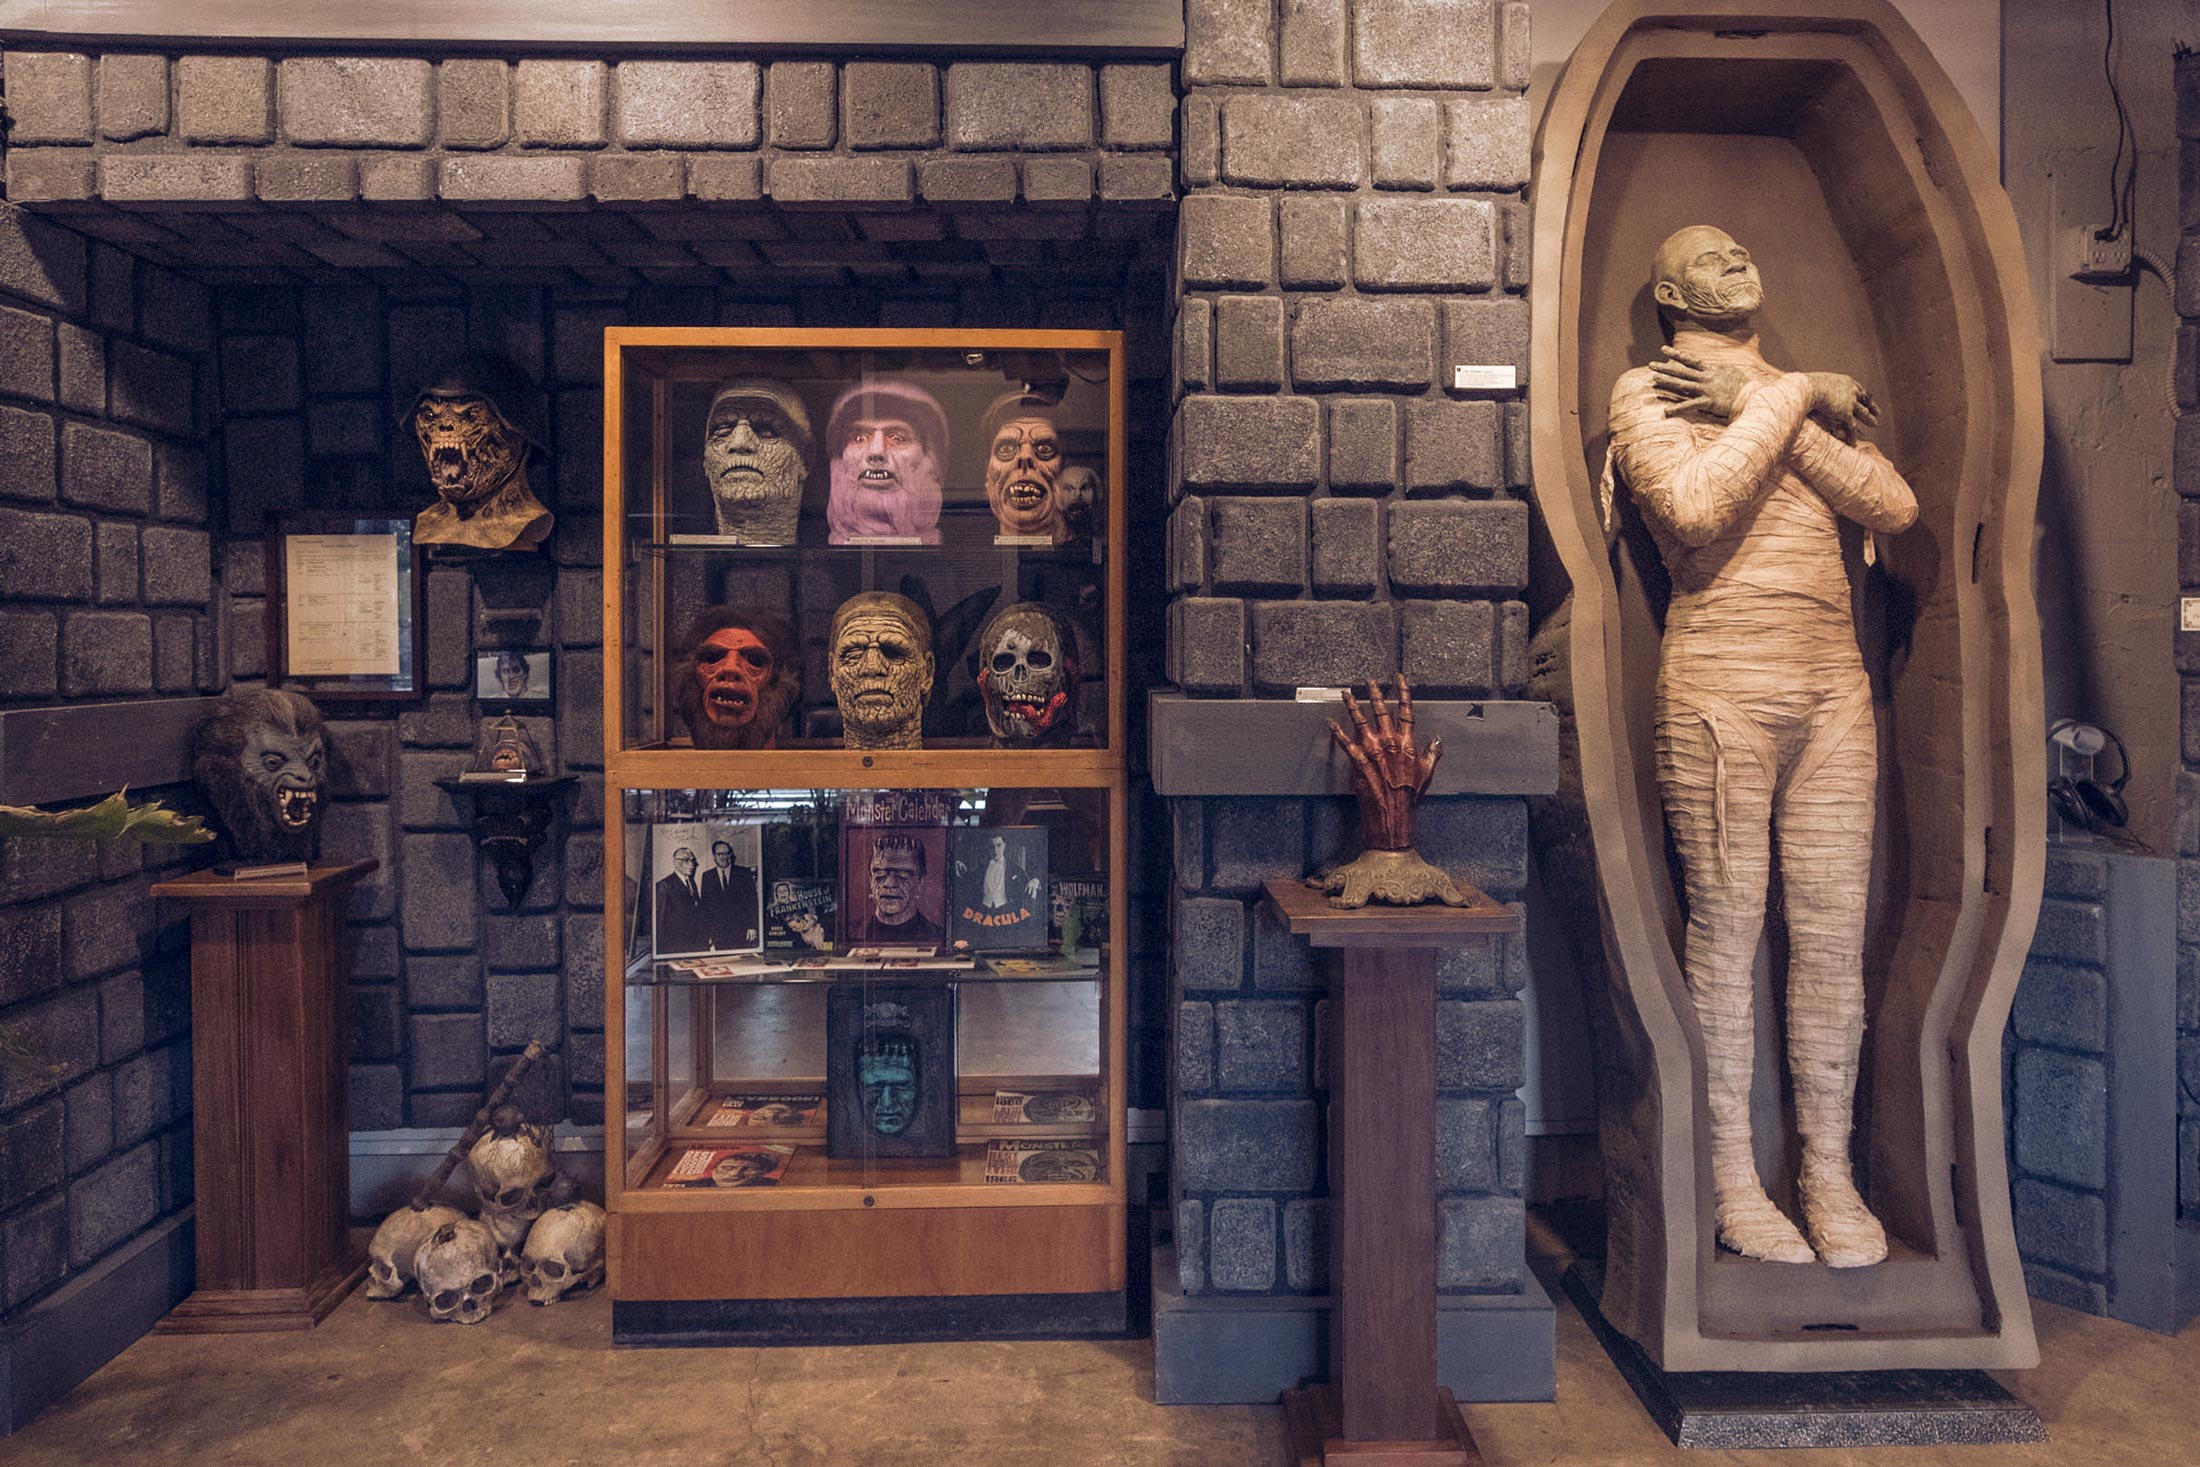 Monster masks and a model mummy on display in an art gallery